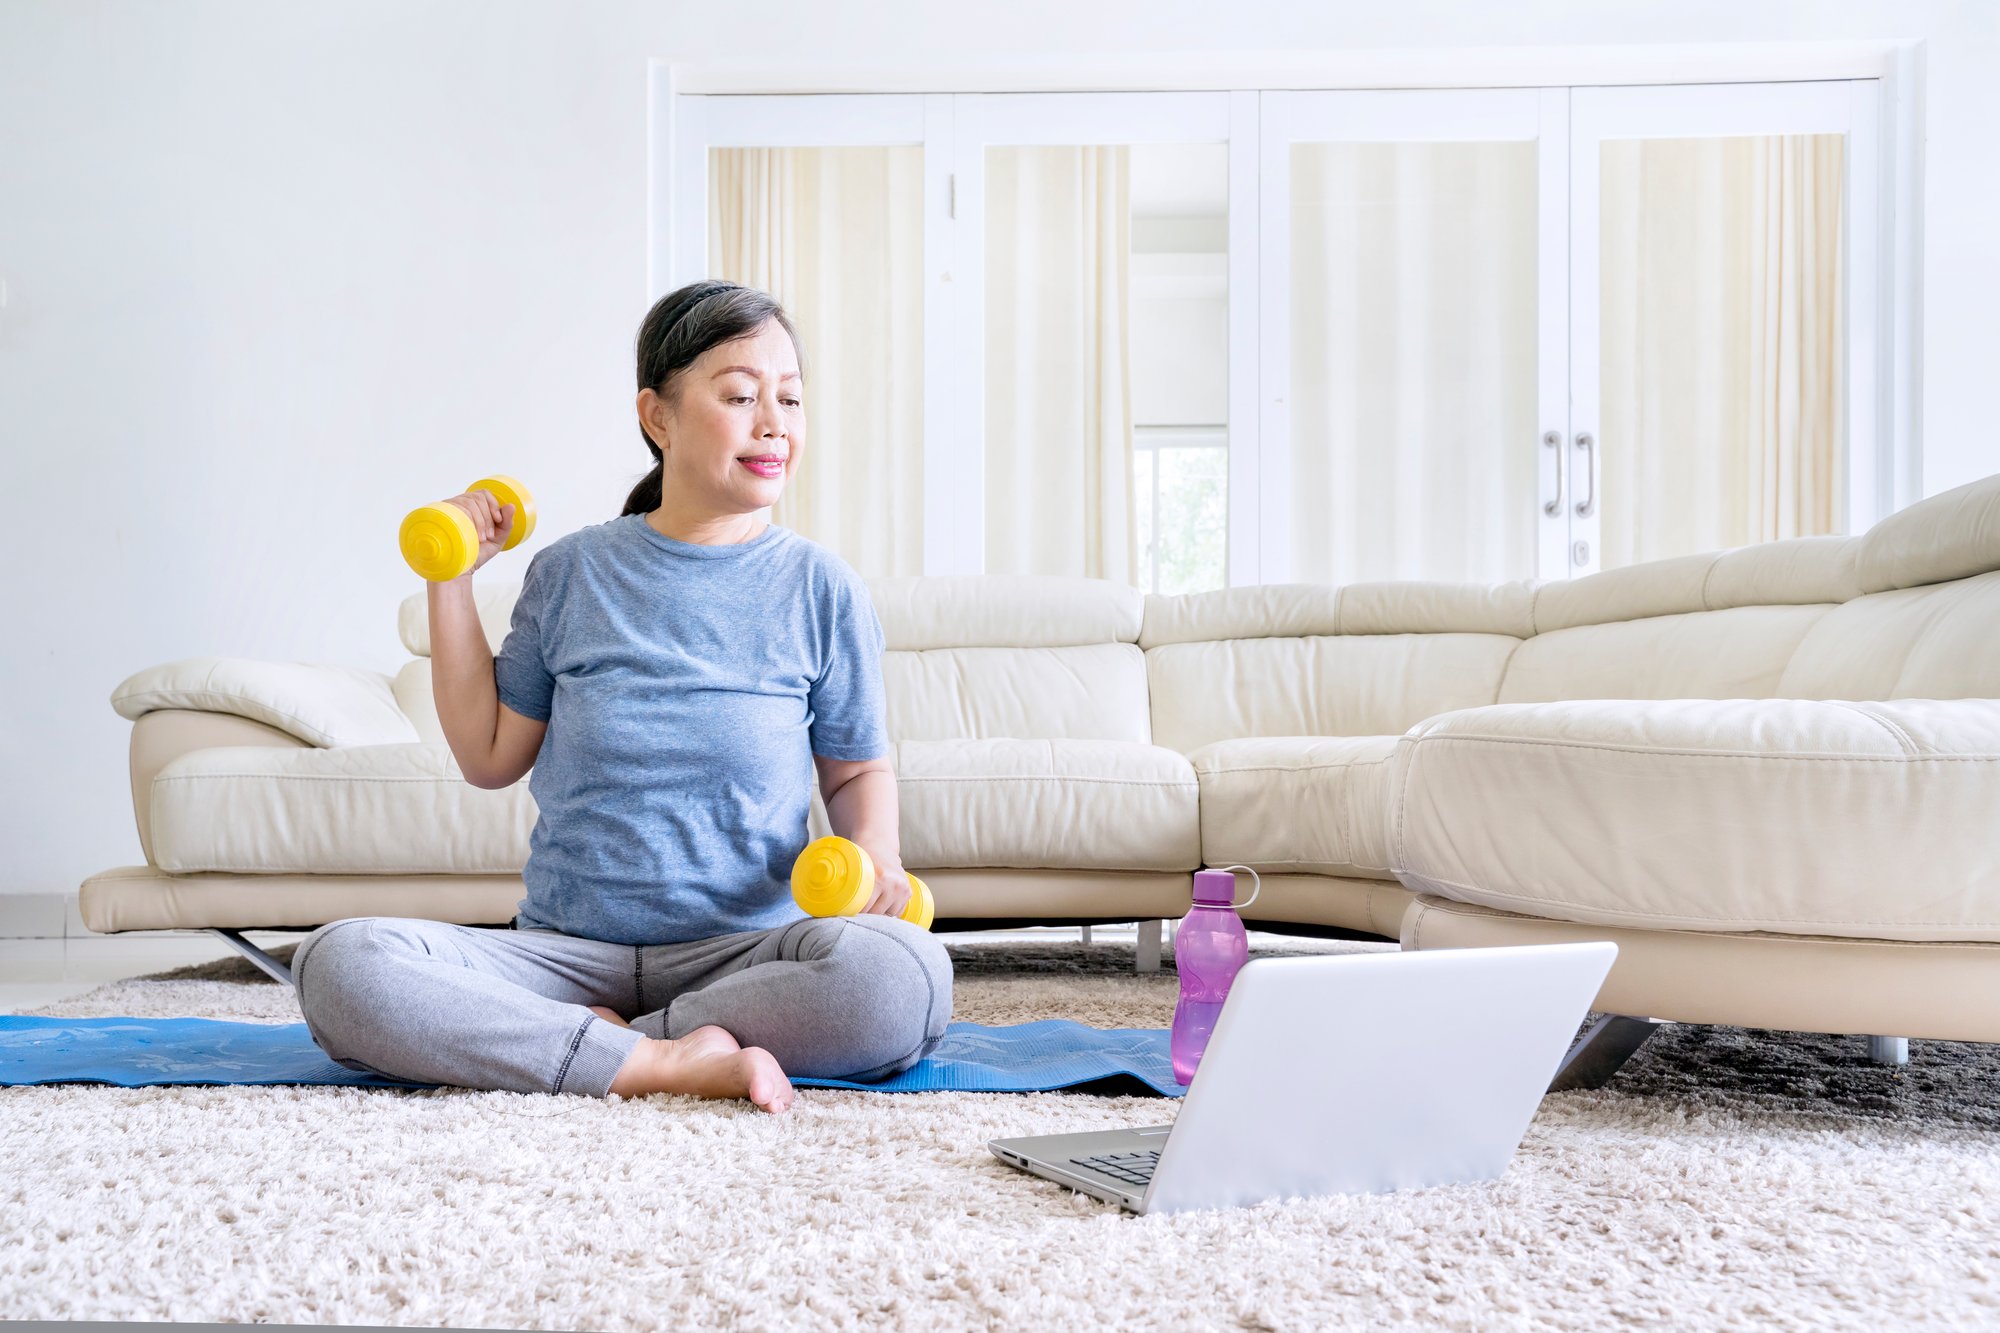 Asian women sitting on living floor watching a workout video with dumbbells in her hands, increasing her bone health and hormones through exercise.